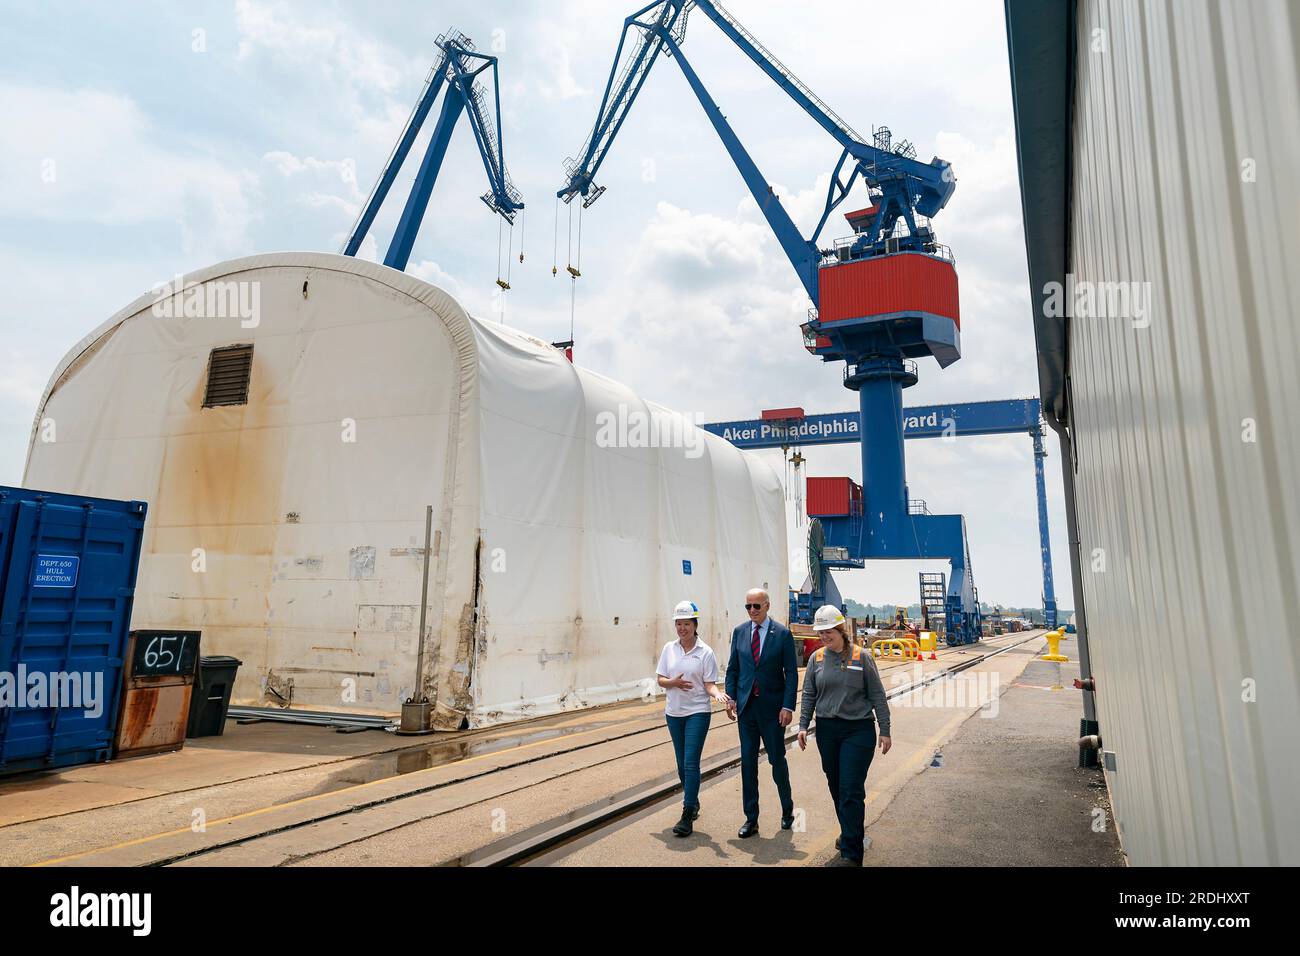 South Philadelphia, United States of America. 20 July, 2023. U.S President Joe Biden, center, is escorted by Emily Andrewson, apprentice welder, right, and Megan Heileman, Manager, PSI Apprentice Program, left, during a visit to the Philly Shipyard, July 20, 2023 in South Philadelphia, Pennsylvania, USA. Credit: Adam Schultz/White House Photo/Alamy Live News Stock Photo